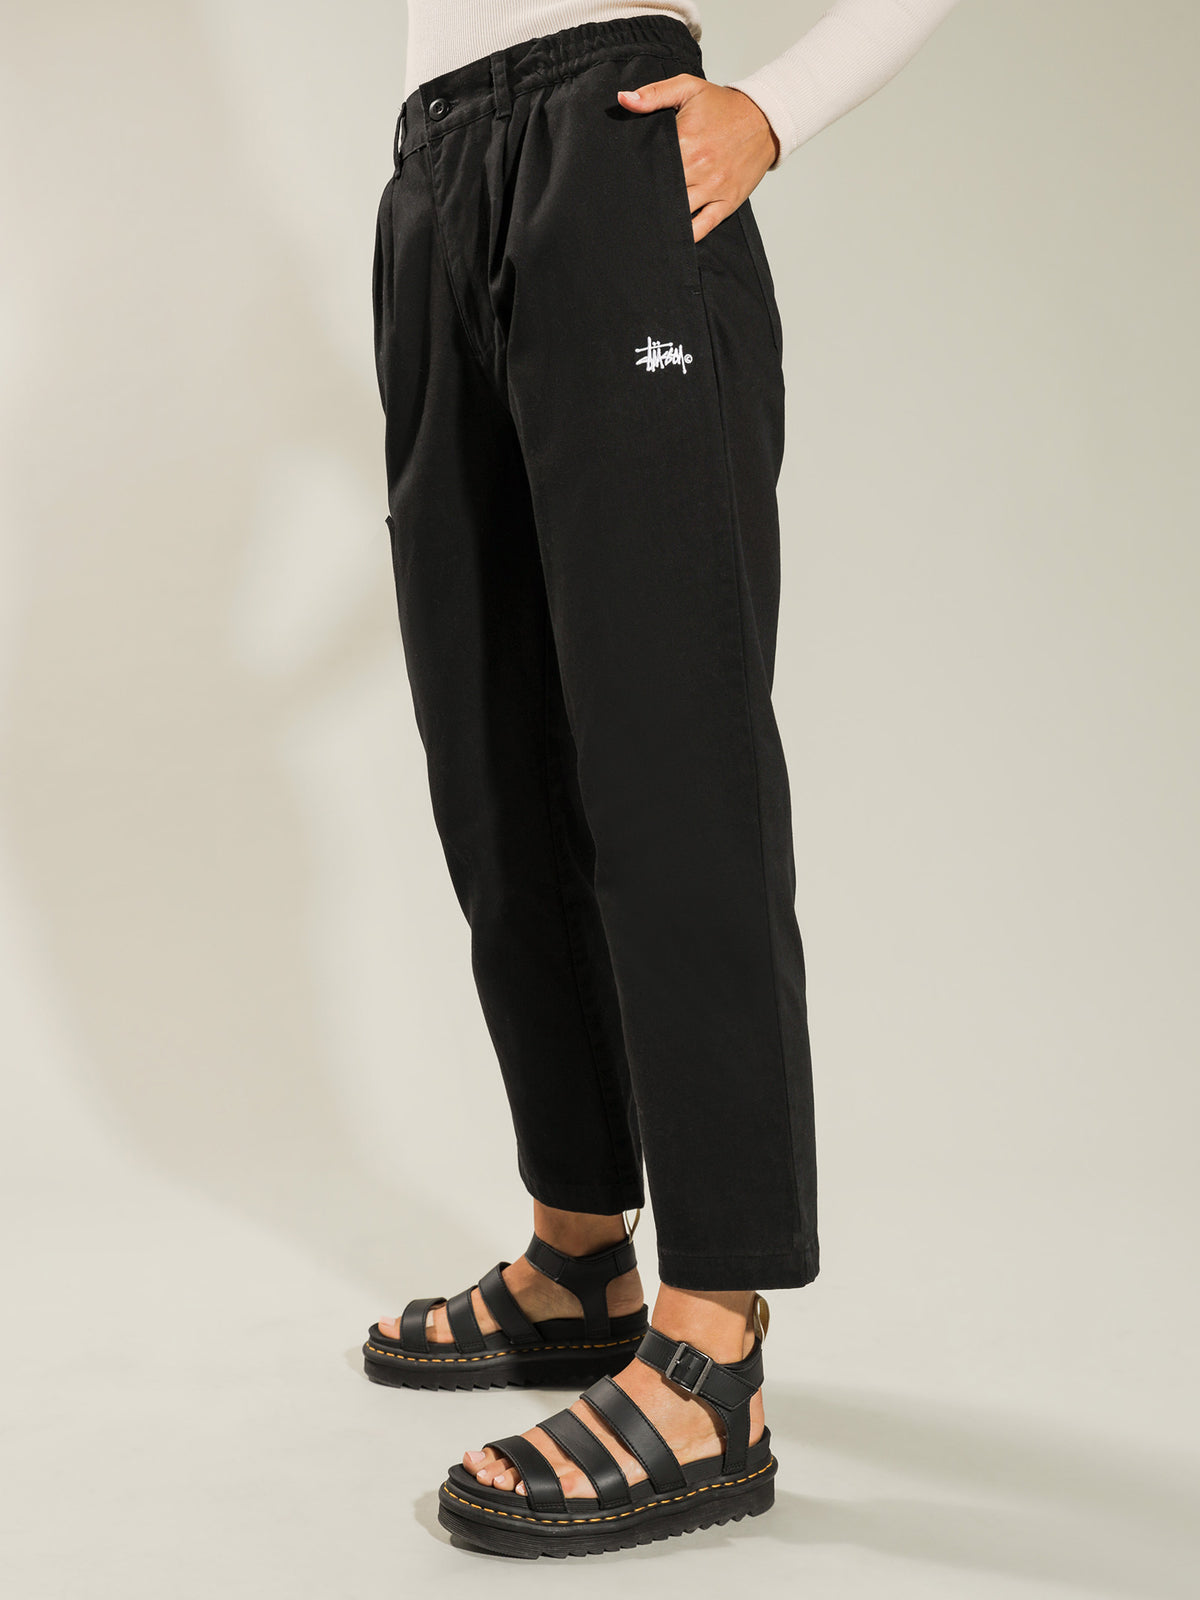 Colfax High Waisted Pants in Black